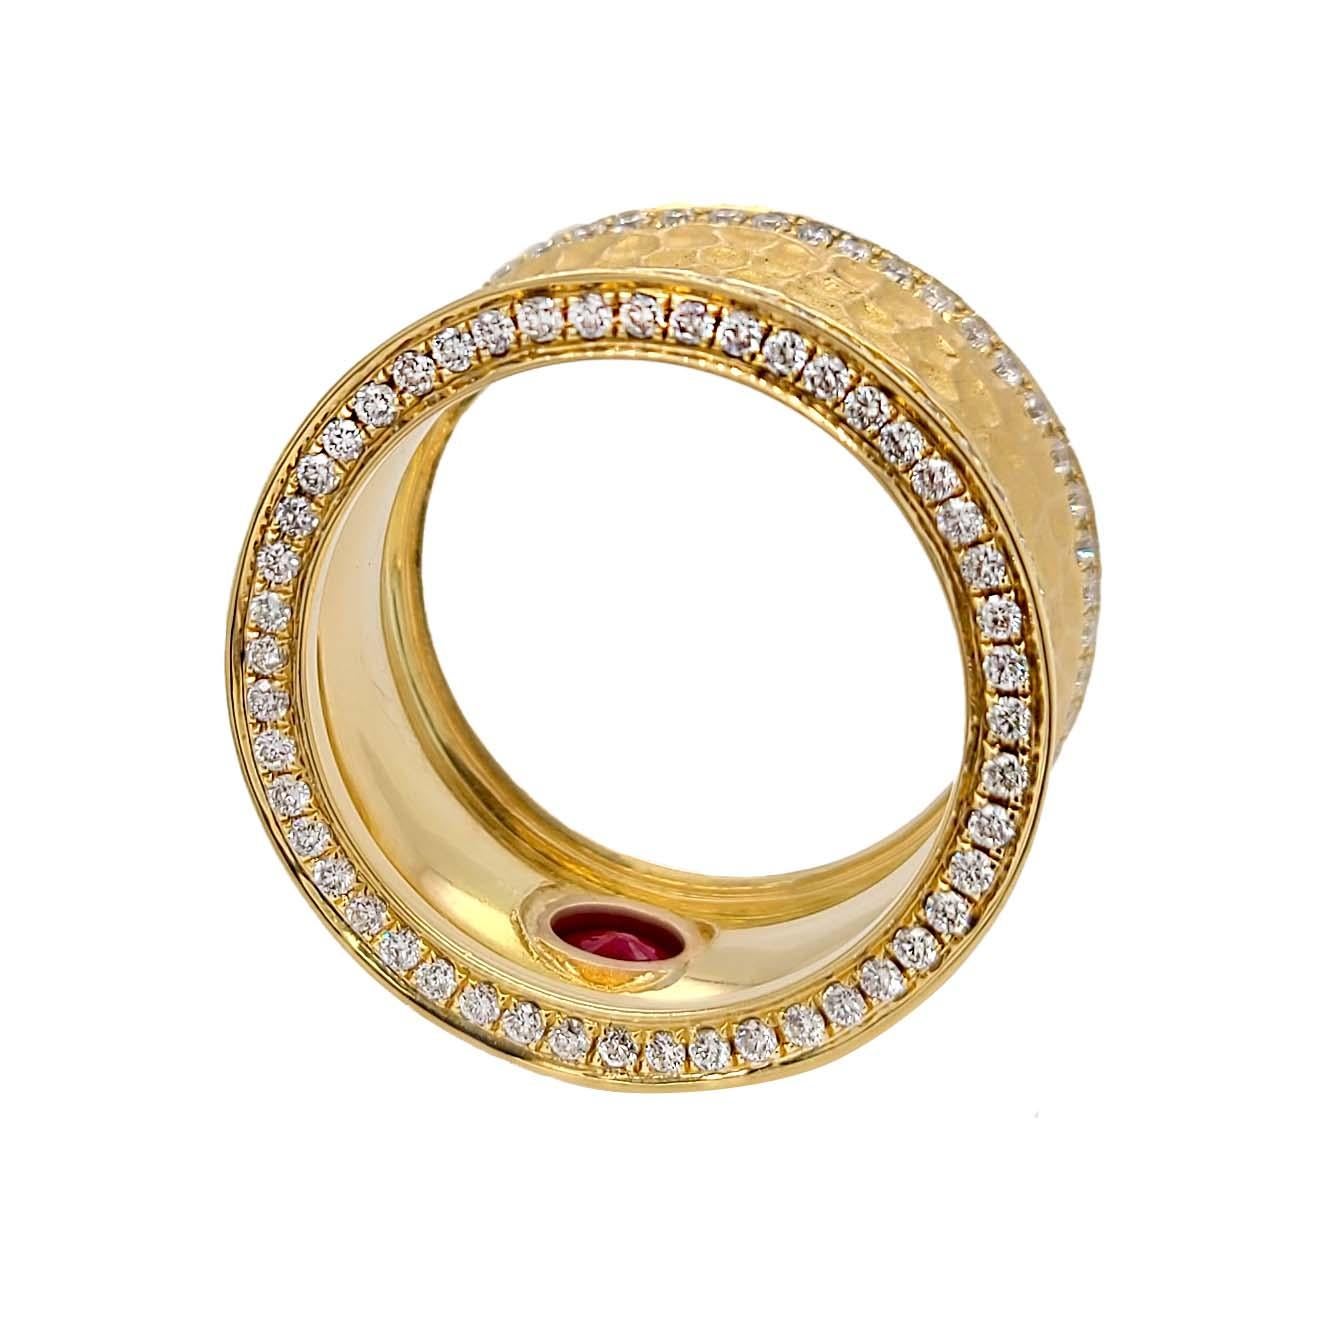 Round Cut Hammer Finish Two-Tone 18 Karat Italian Diamond Ring with Ruby Center Stone For Sale